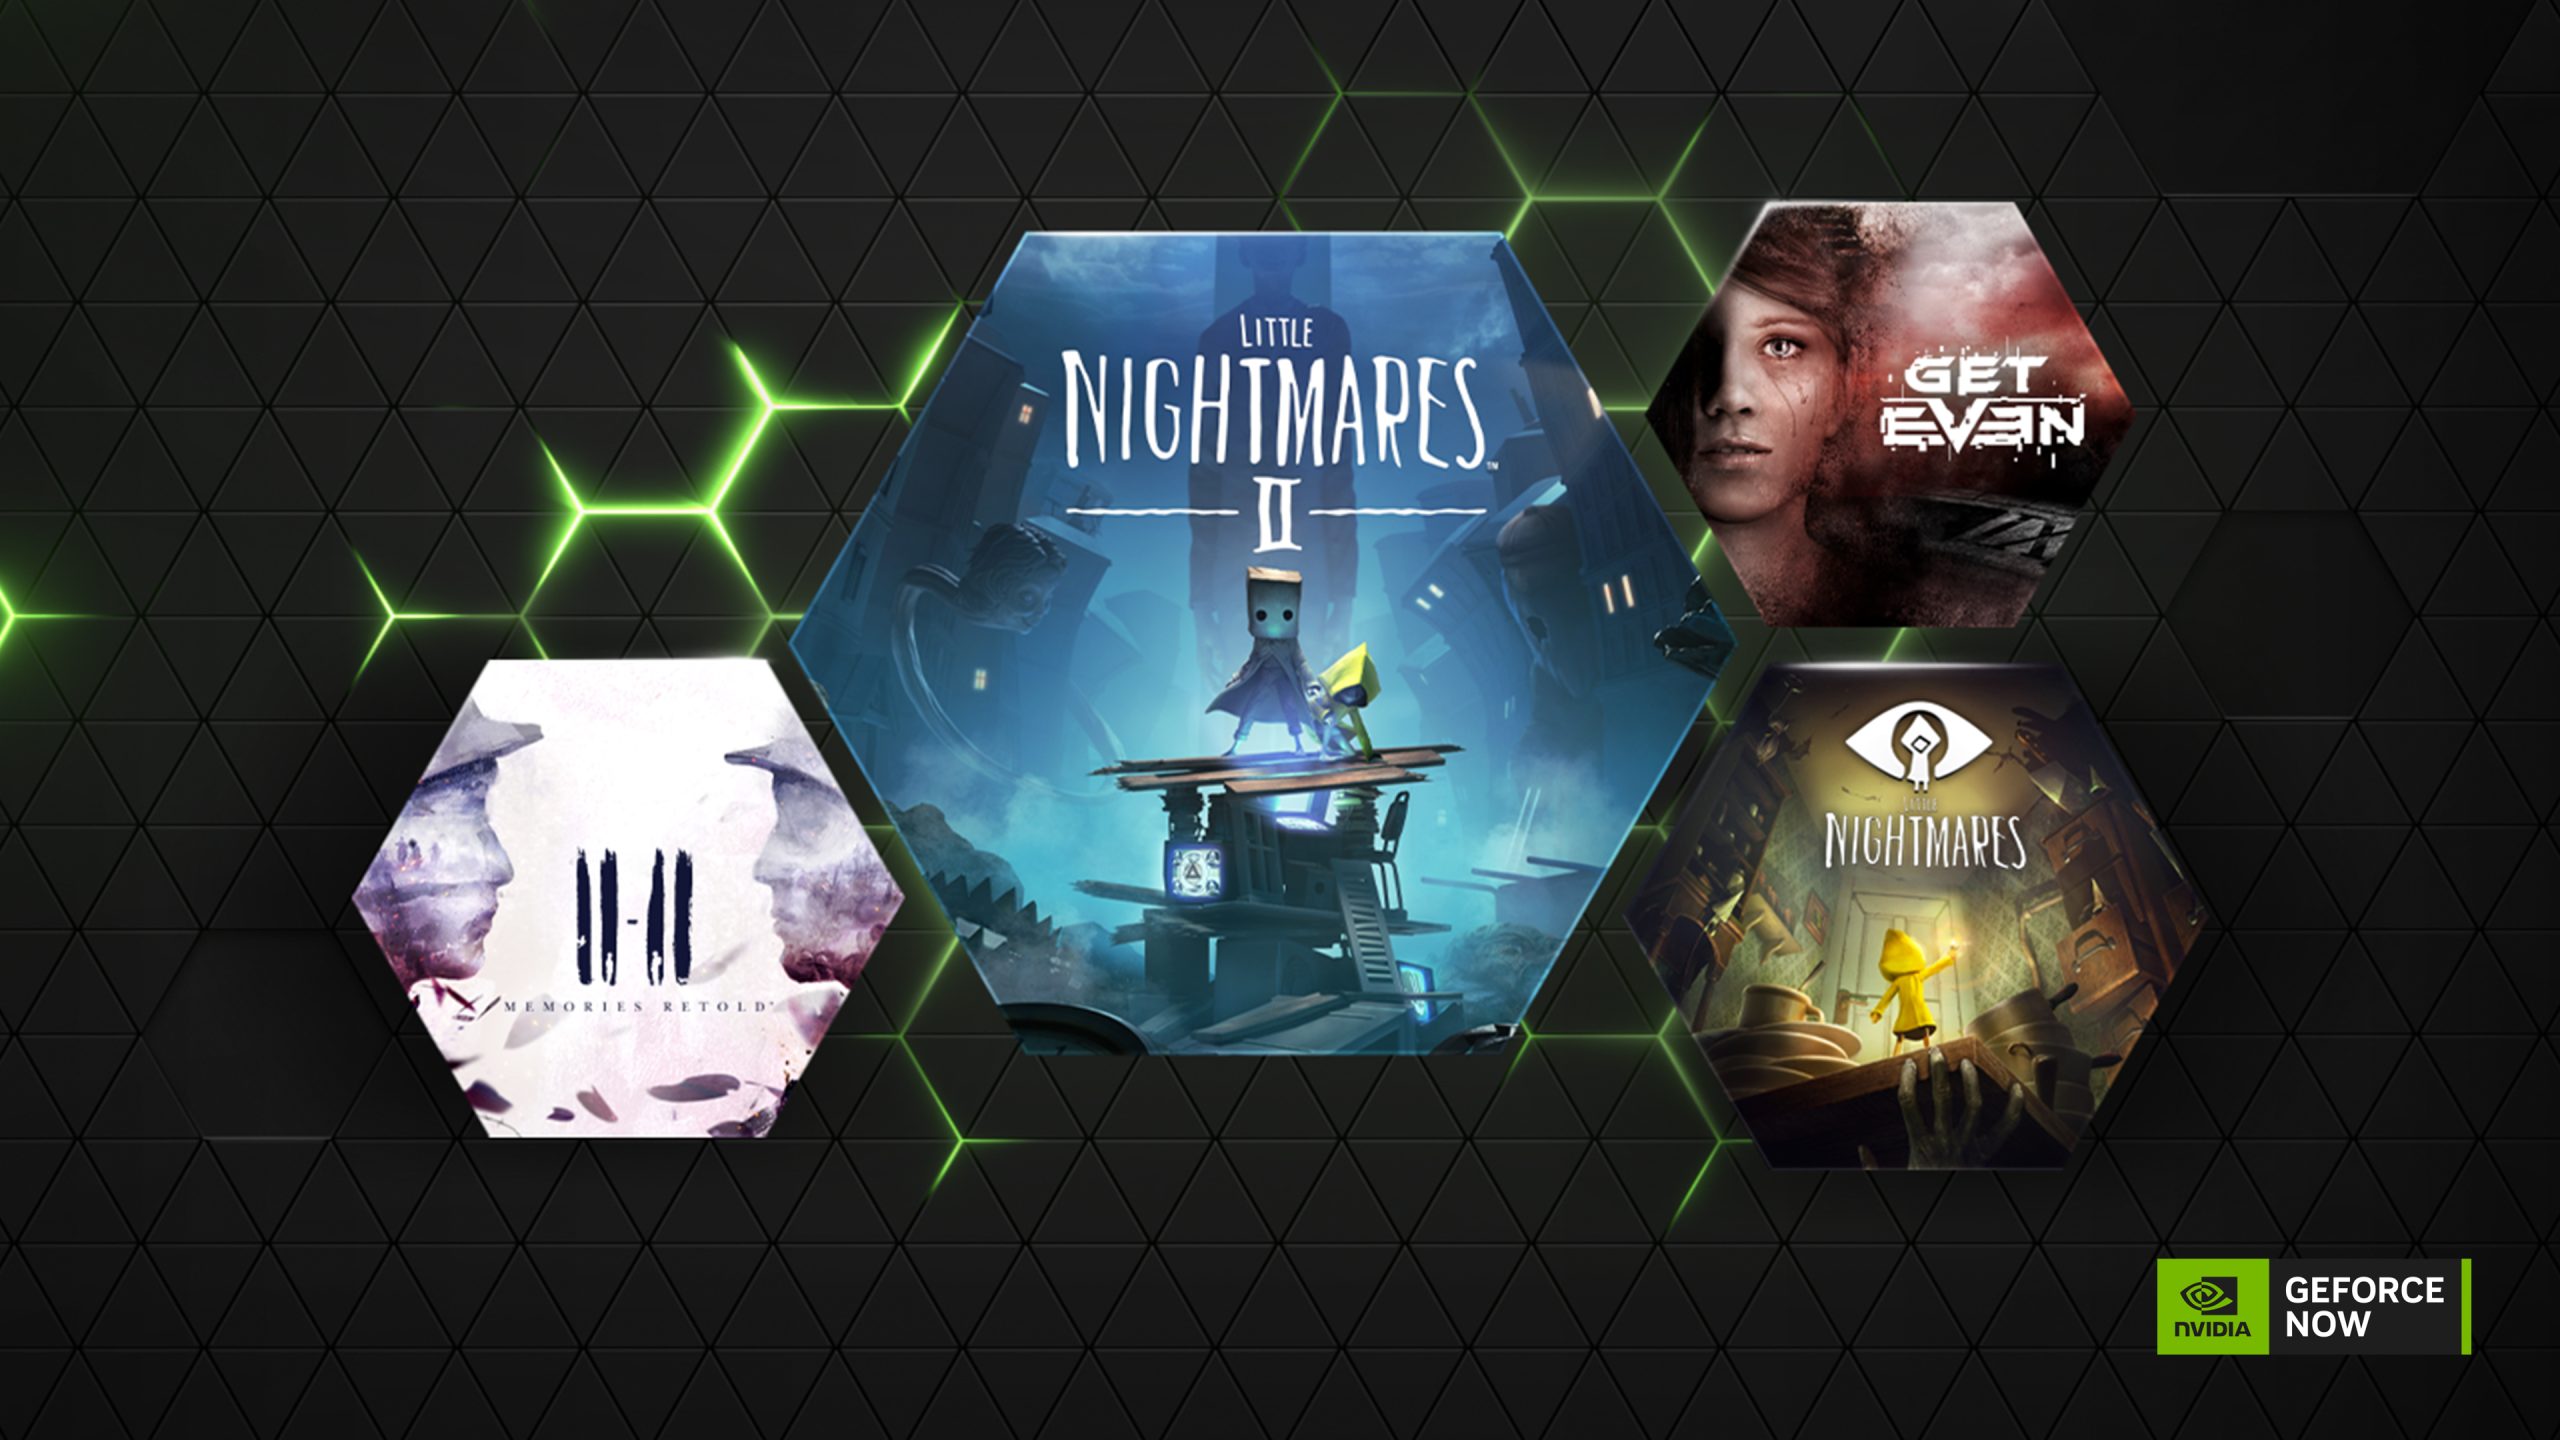 List of available games on NVIDIA GeForce Now